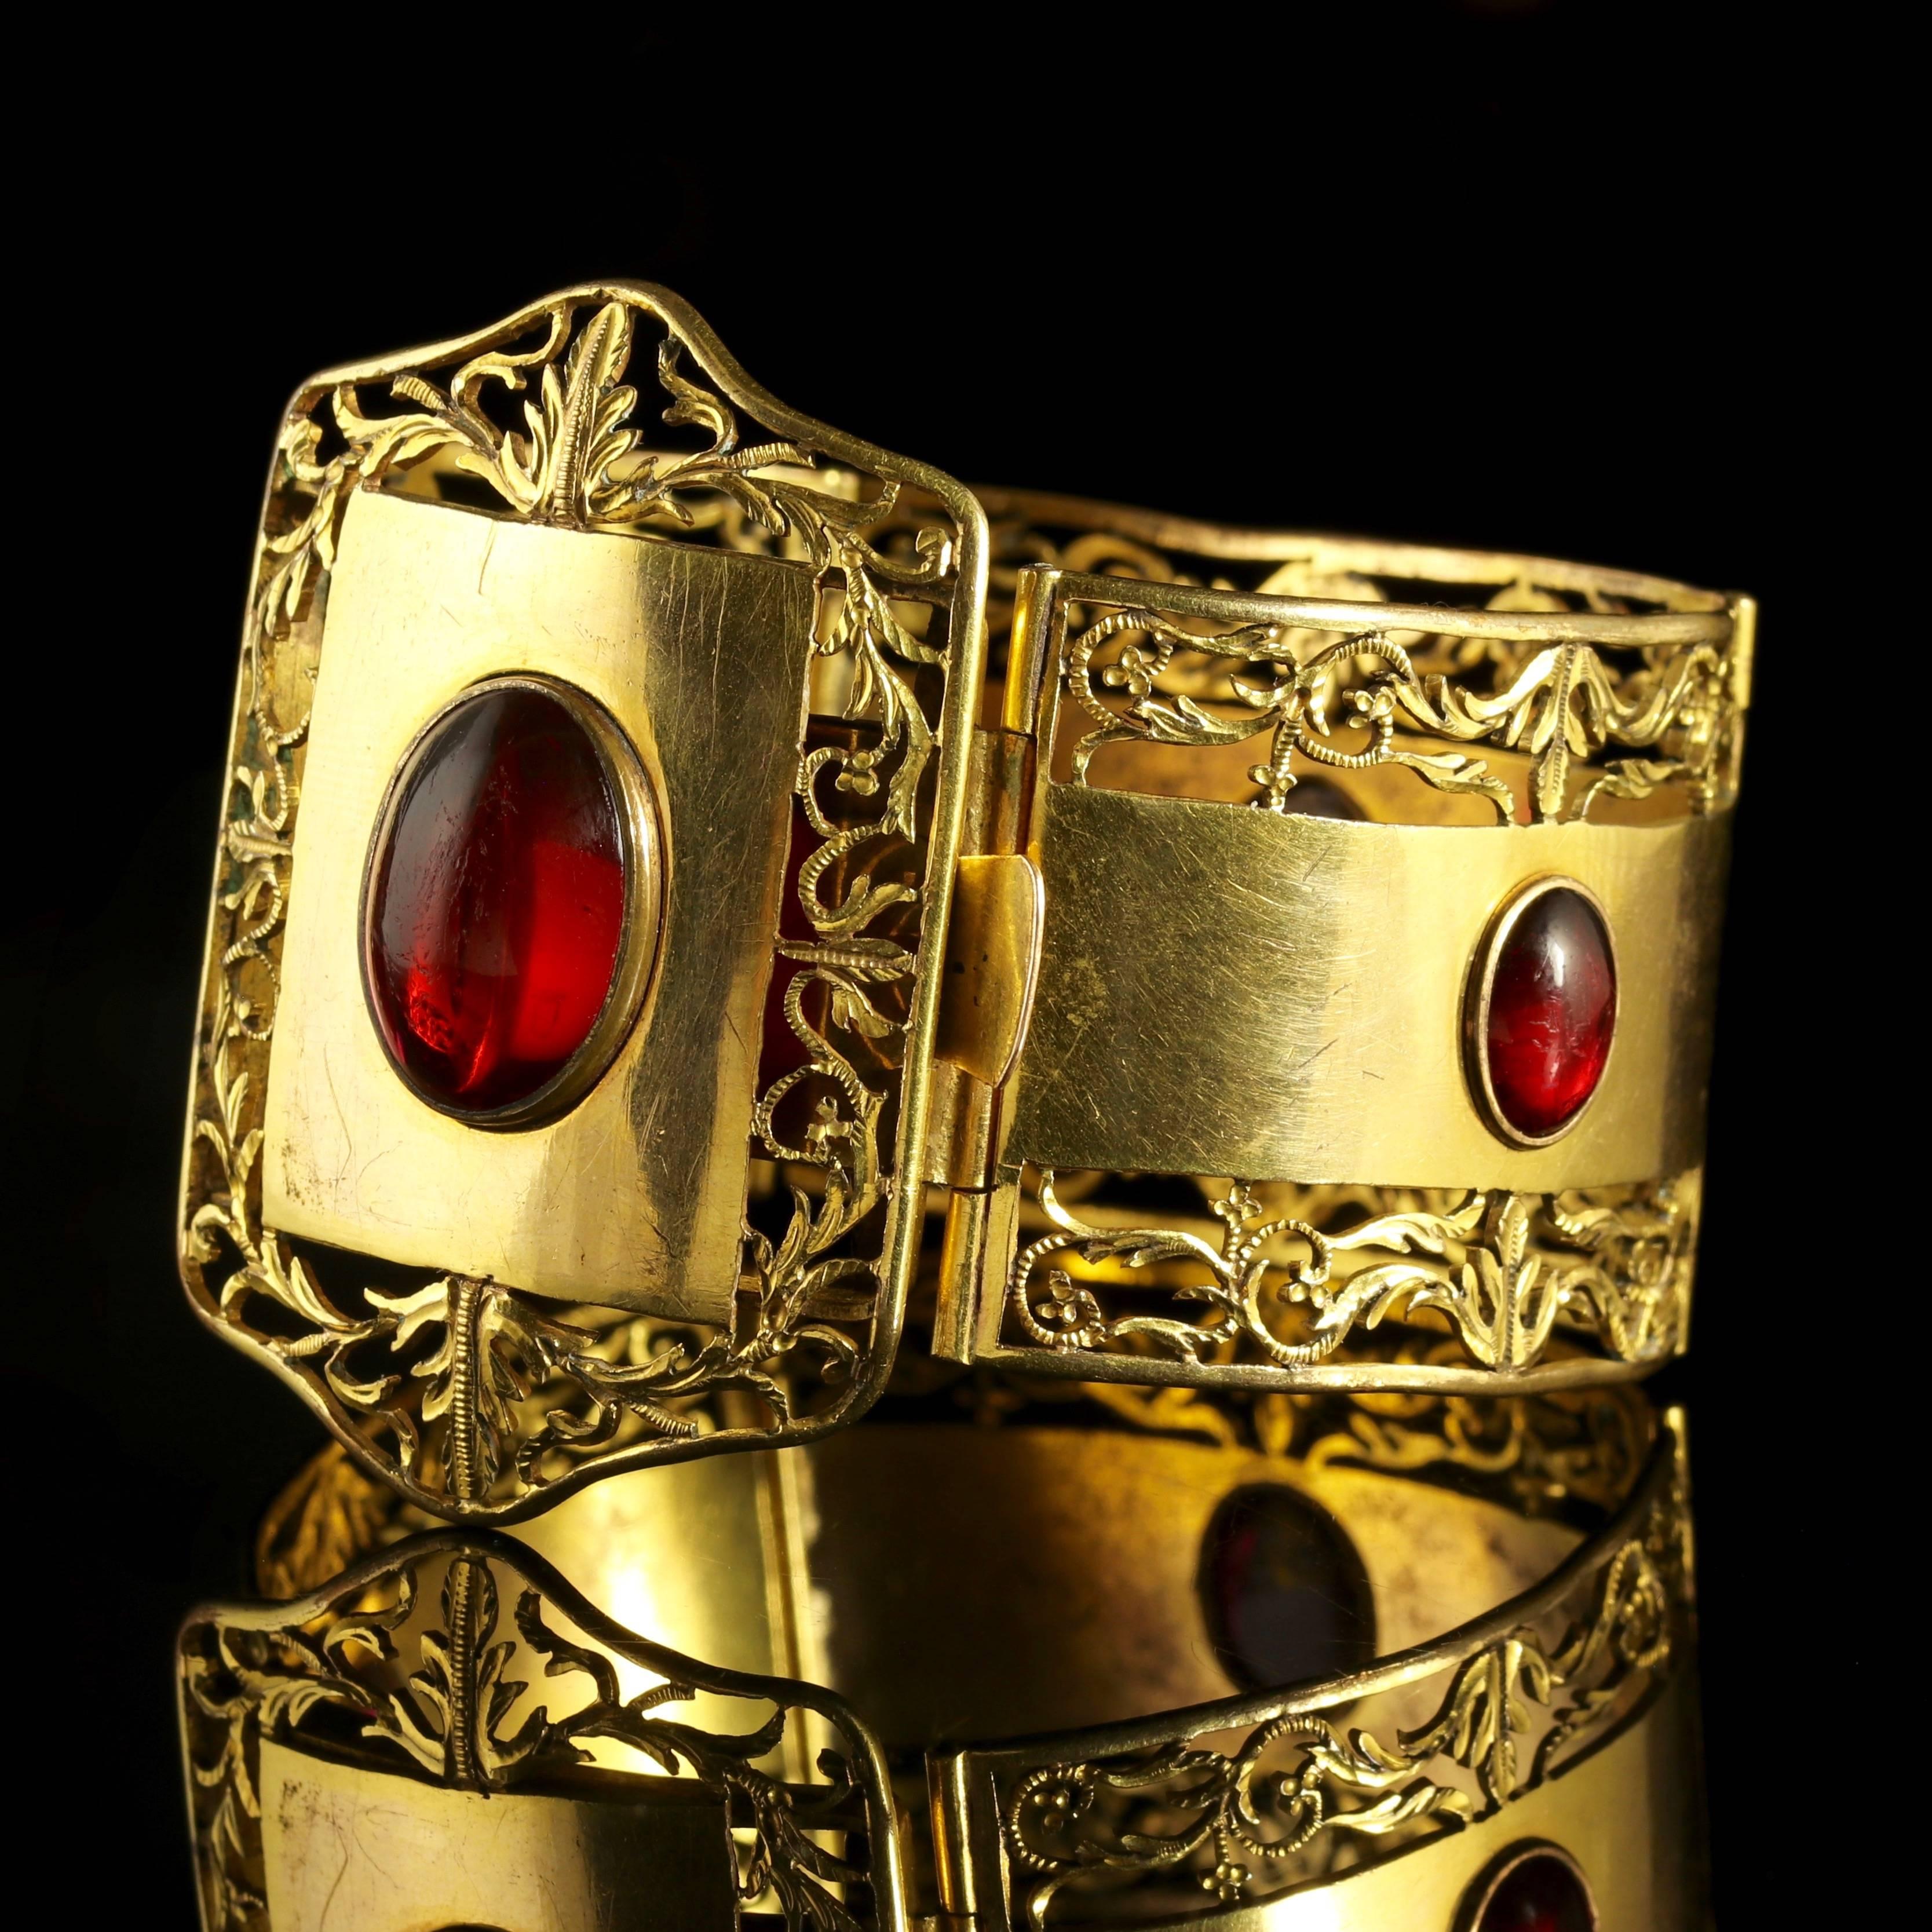 This large antique Victorian 18ct Gold Gilt bracelet is articulated, set with 4 red Cabochon Paste Stones.

A genuine Victorian piece, Circa 1900. 

The largest Cabochon Paste Stone is over 7ct in size and is a deep Garnet red. 

Paste is a heavy,